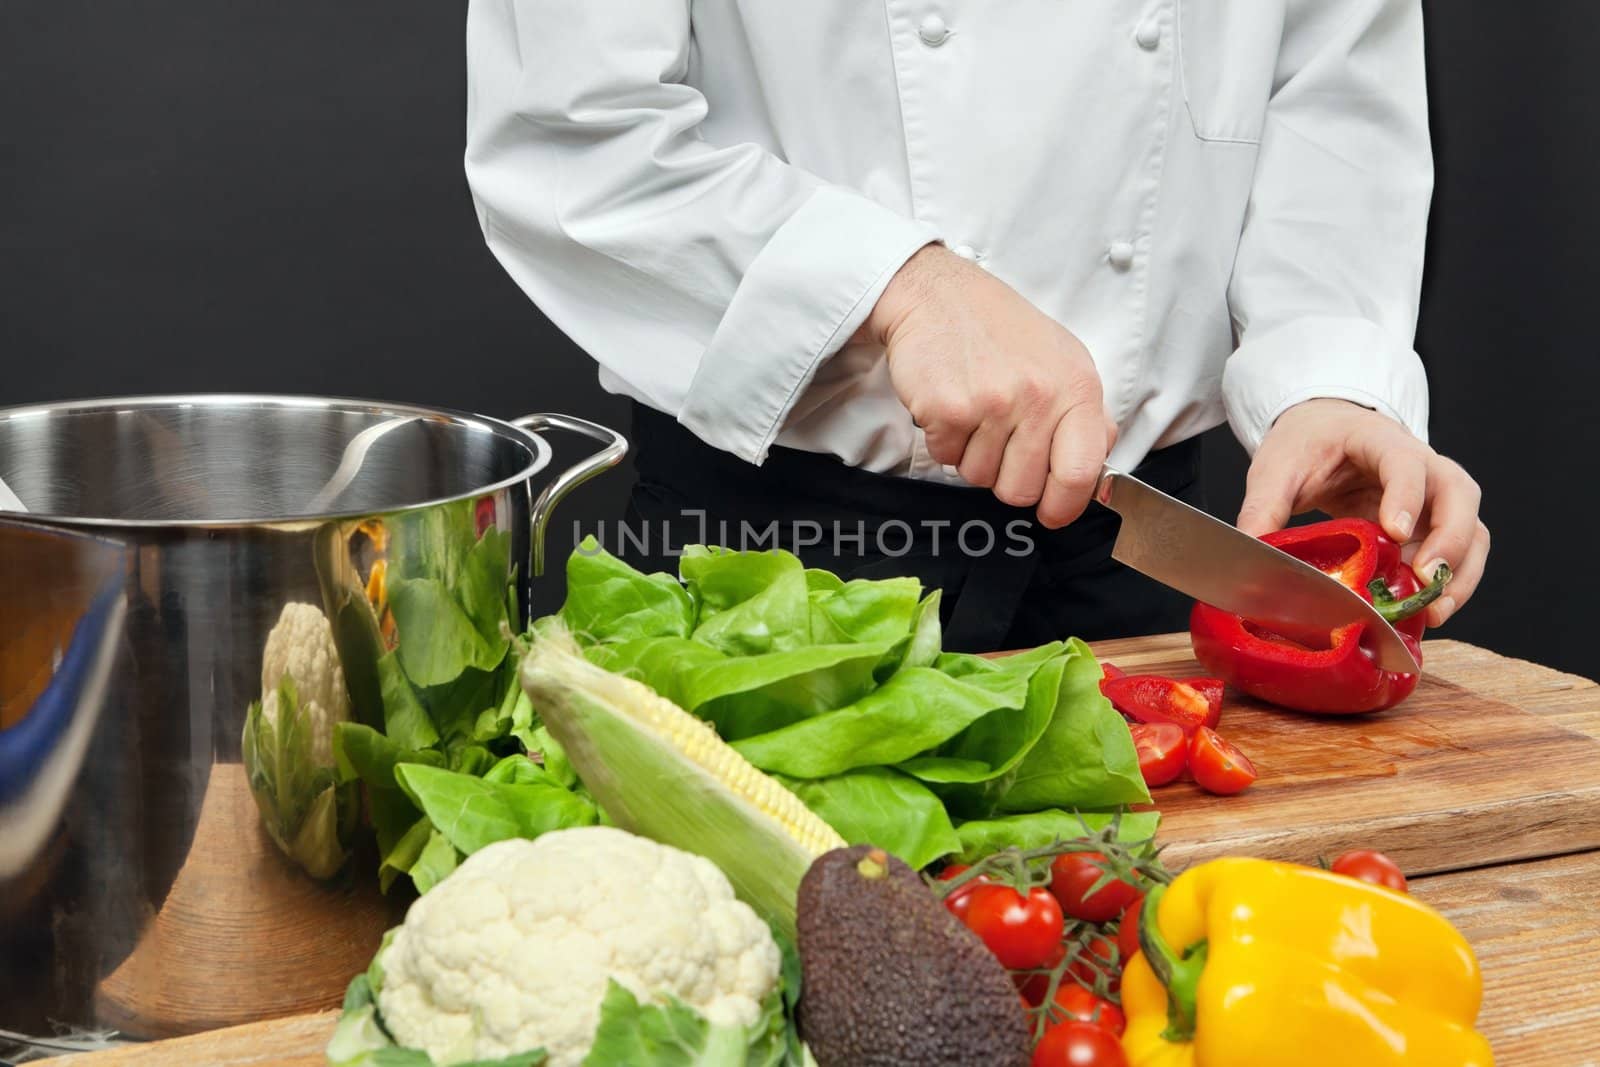 Photo of a chef chopping vegetables on a wooden cutting board.